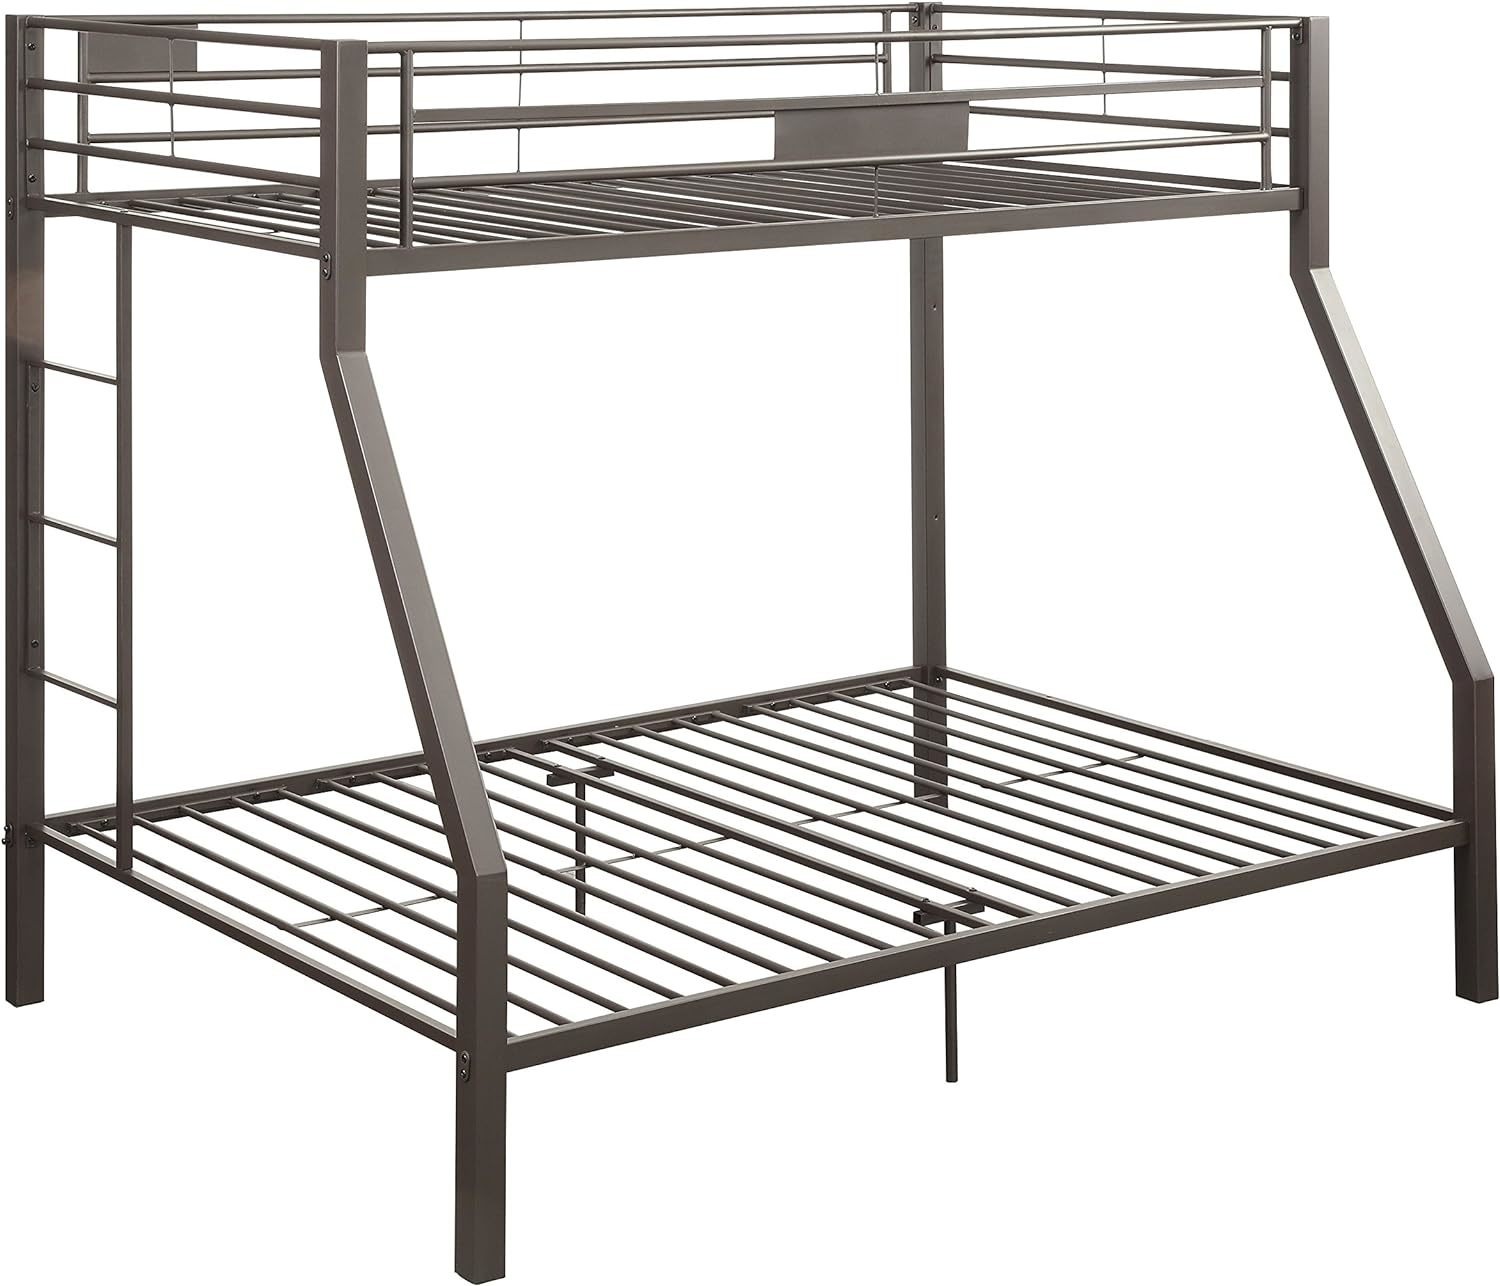 Twin Over Full Bunk Bed In Acme Limbra Brown. - $476.99